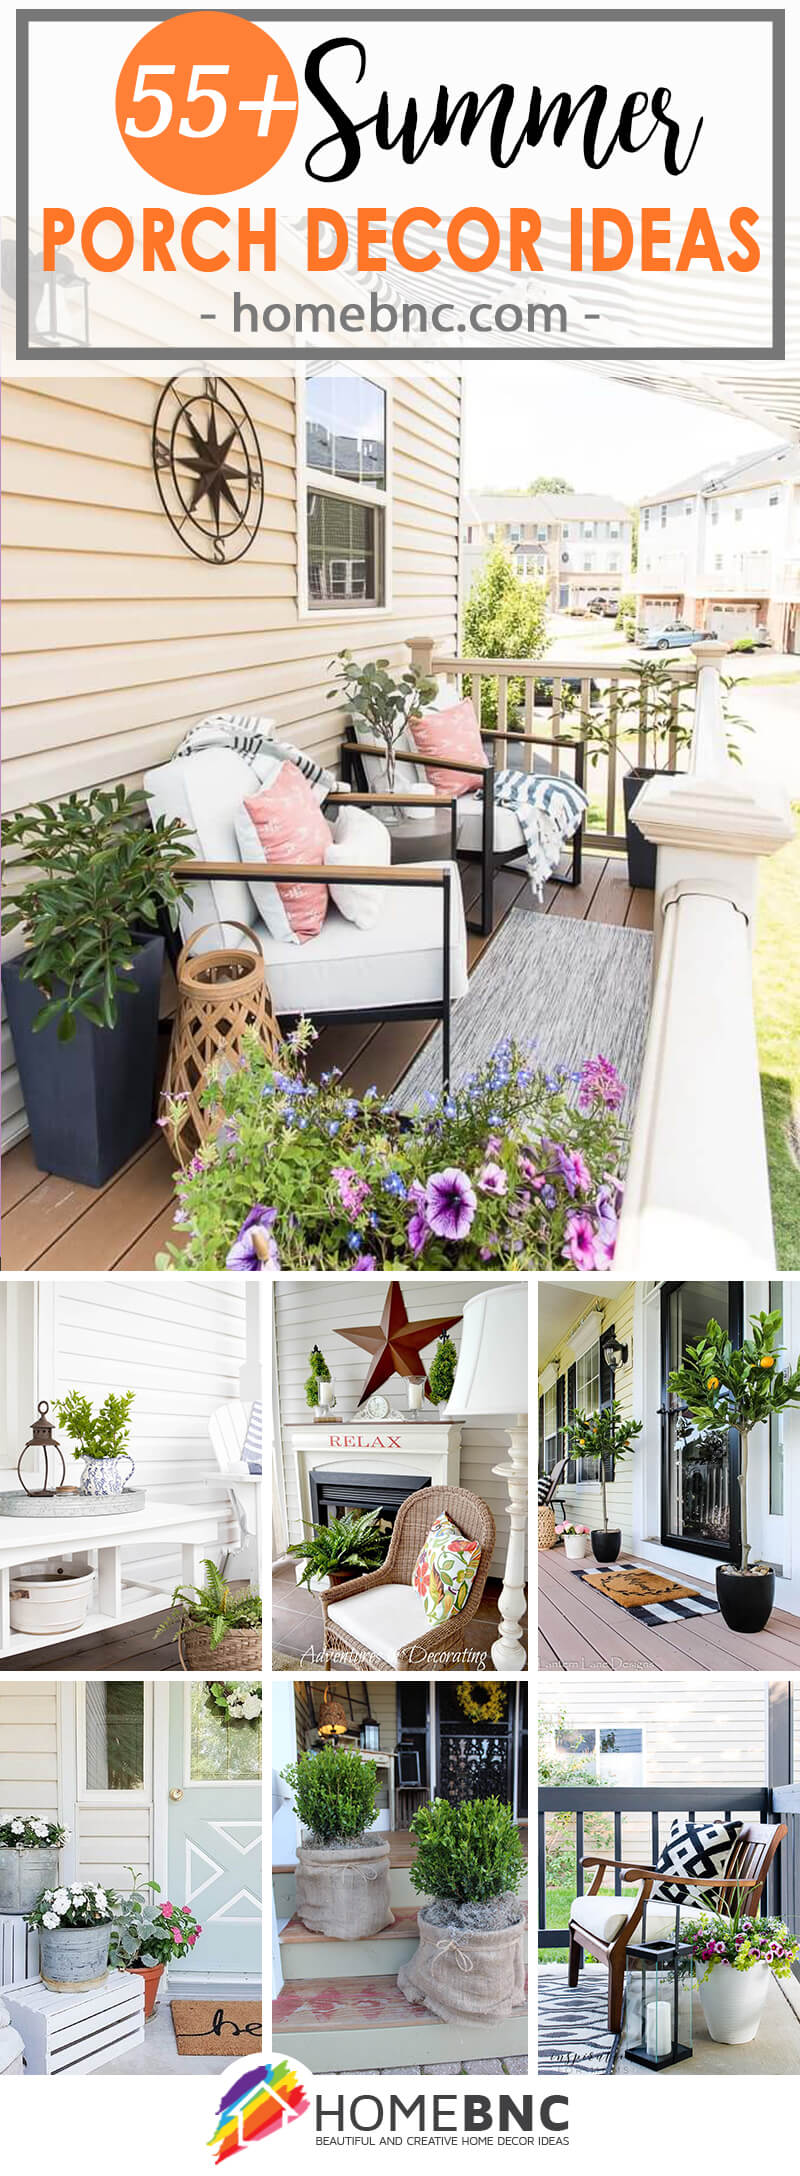 20+ Best Summer Porch Decor Ideas and Designs for 20